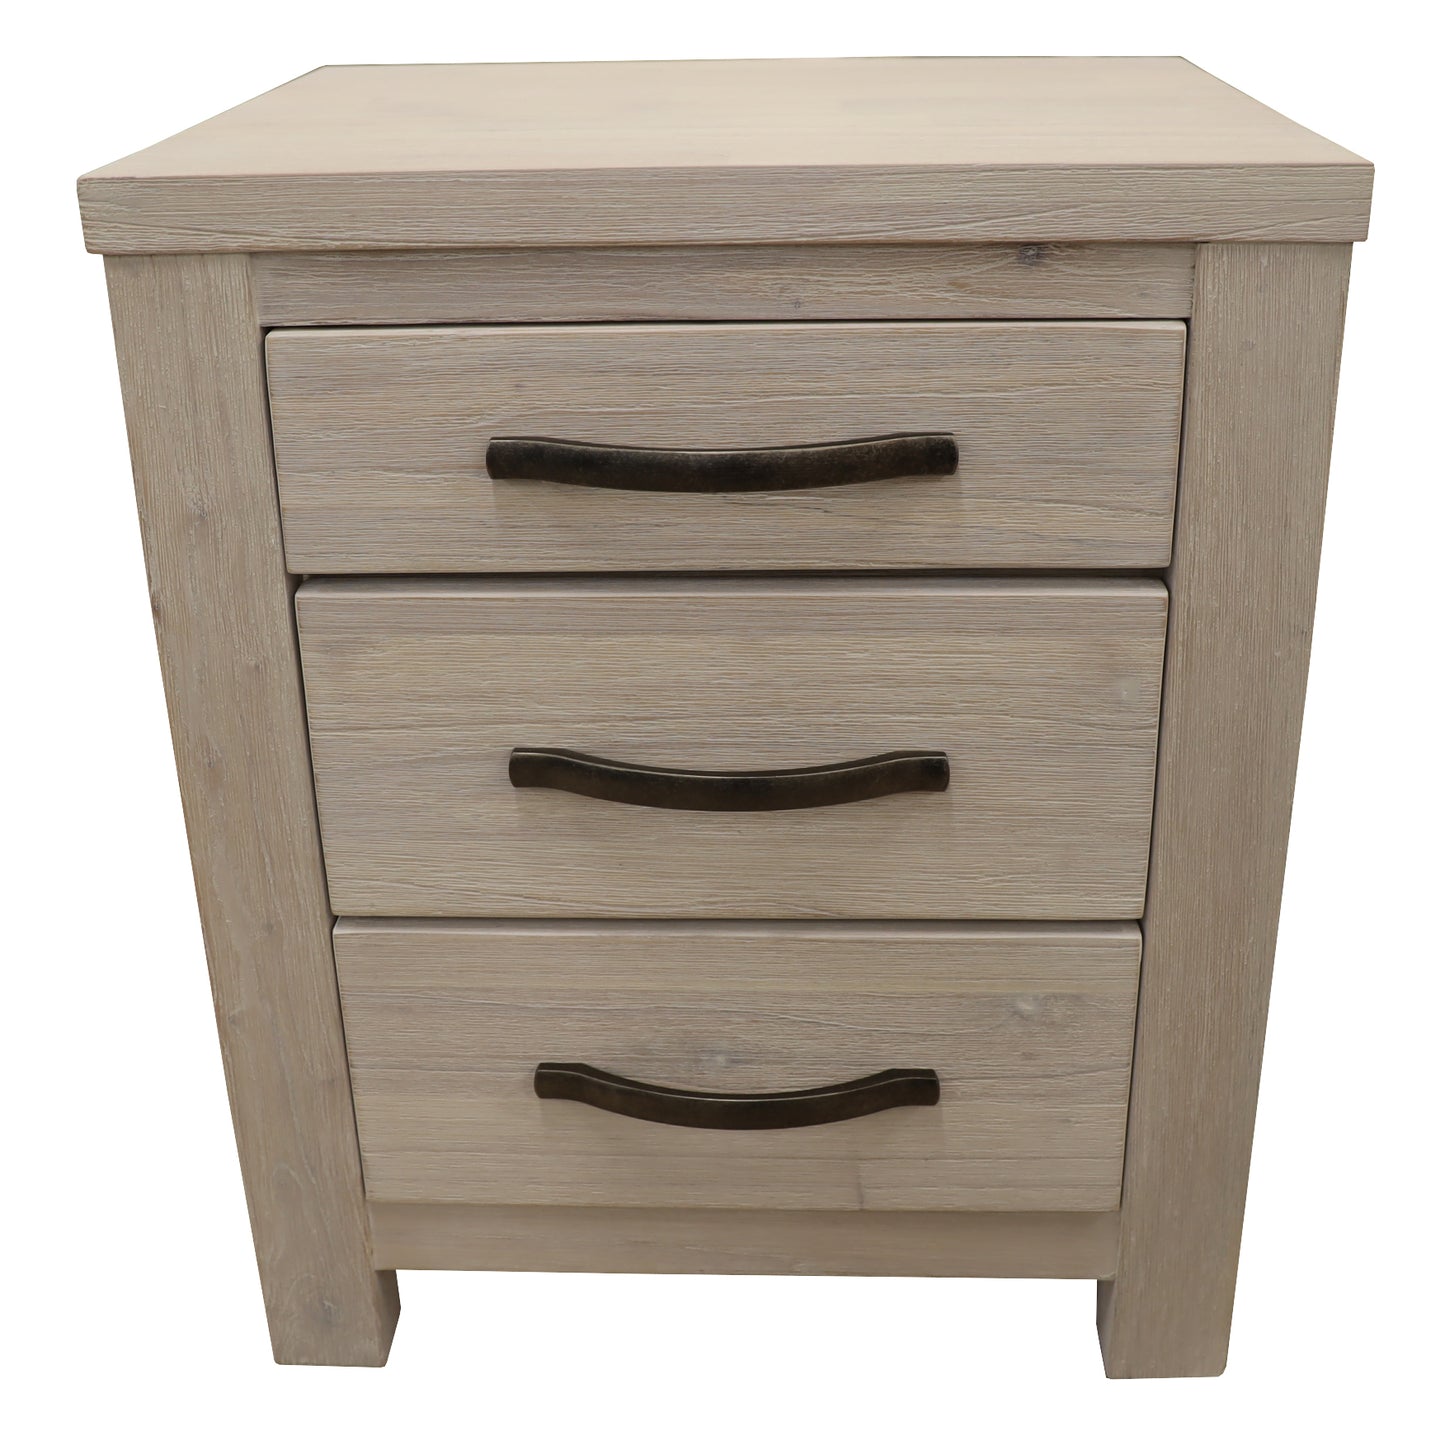 Foxglove Bedside Tables 3 Drawers - White Ash